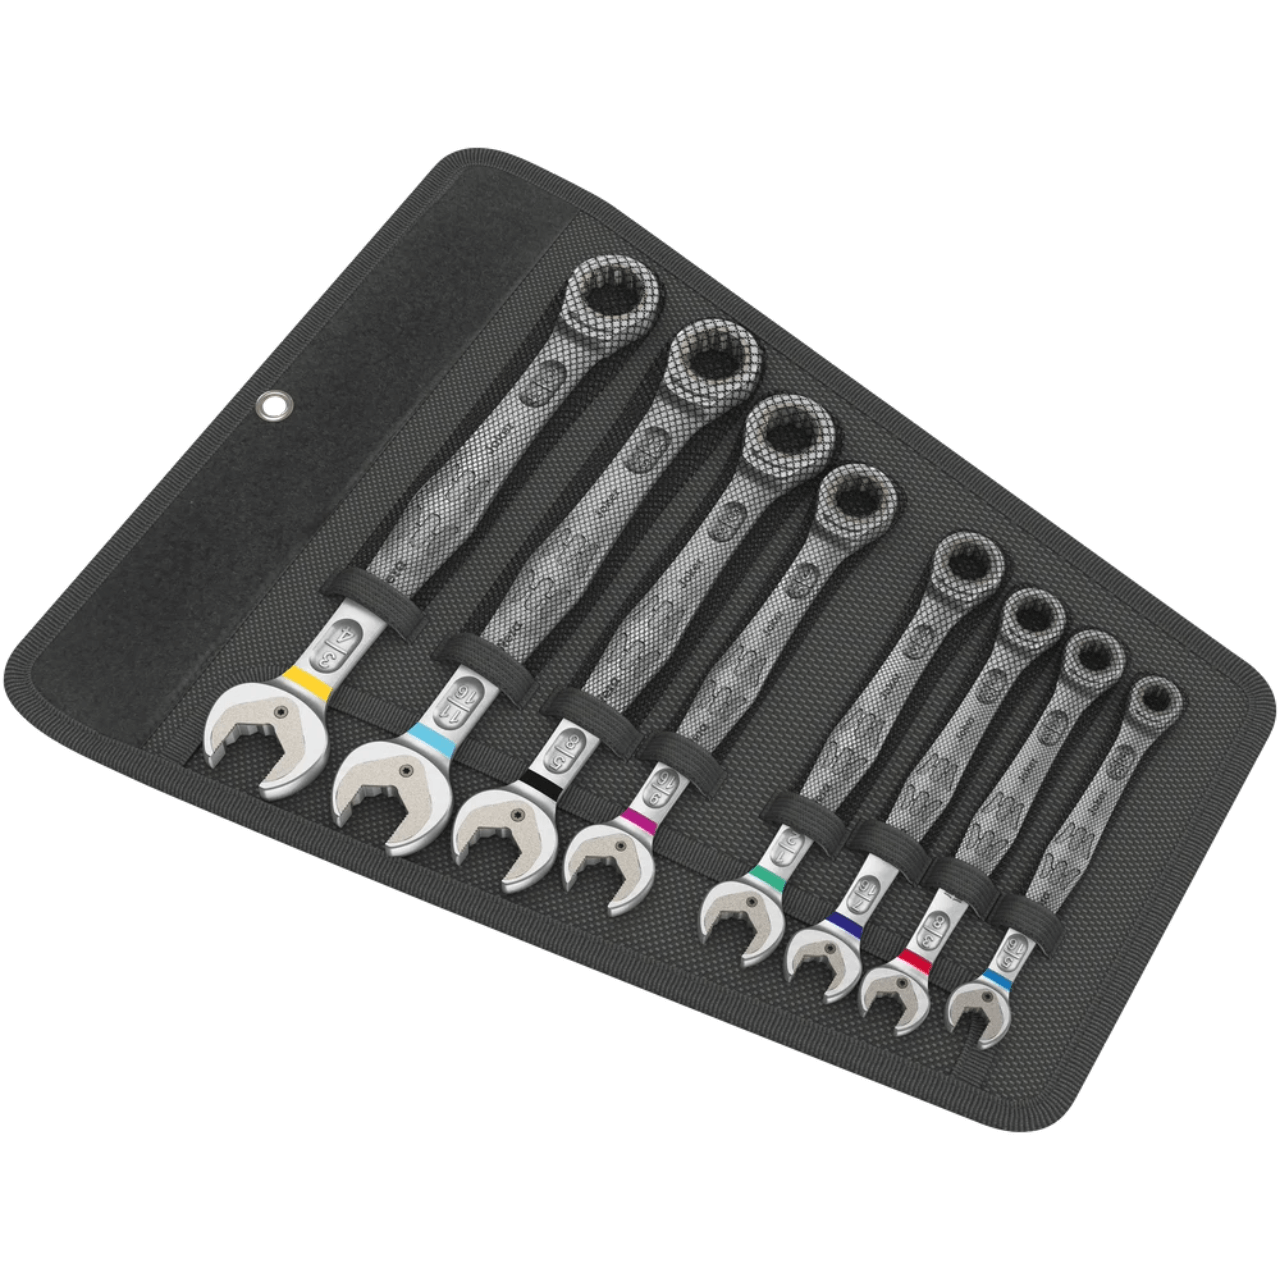 WERA 6000 Joker 8 Imperial Set 1 Set of ratcheting combination wrenches, Imperial